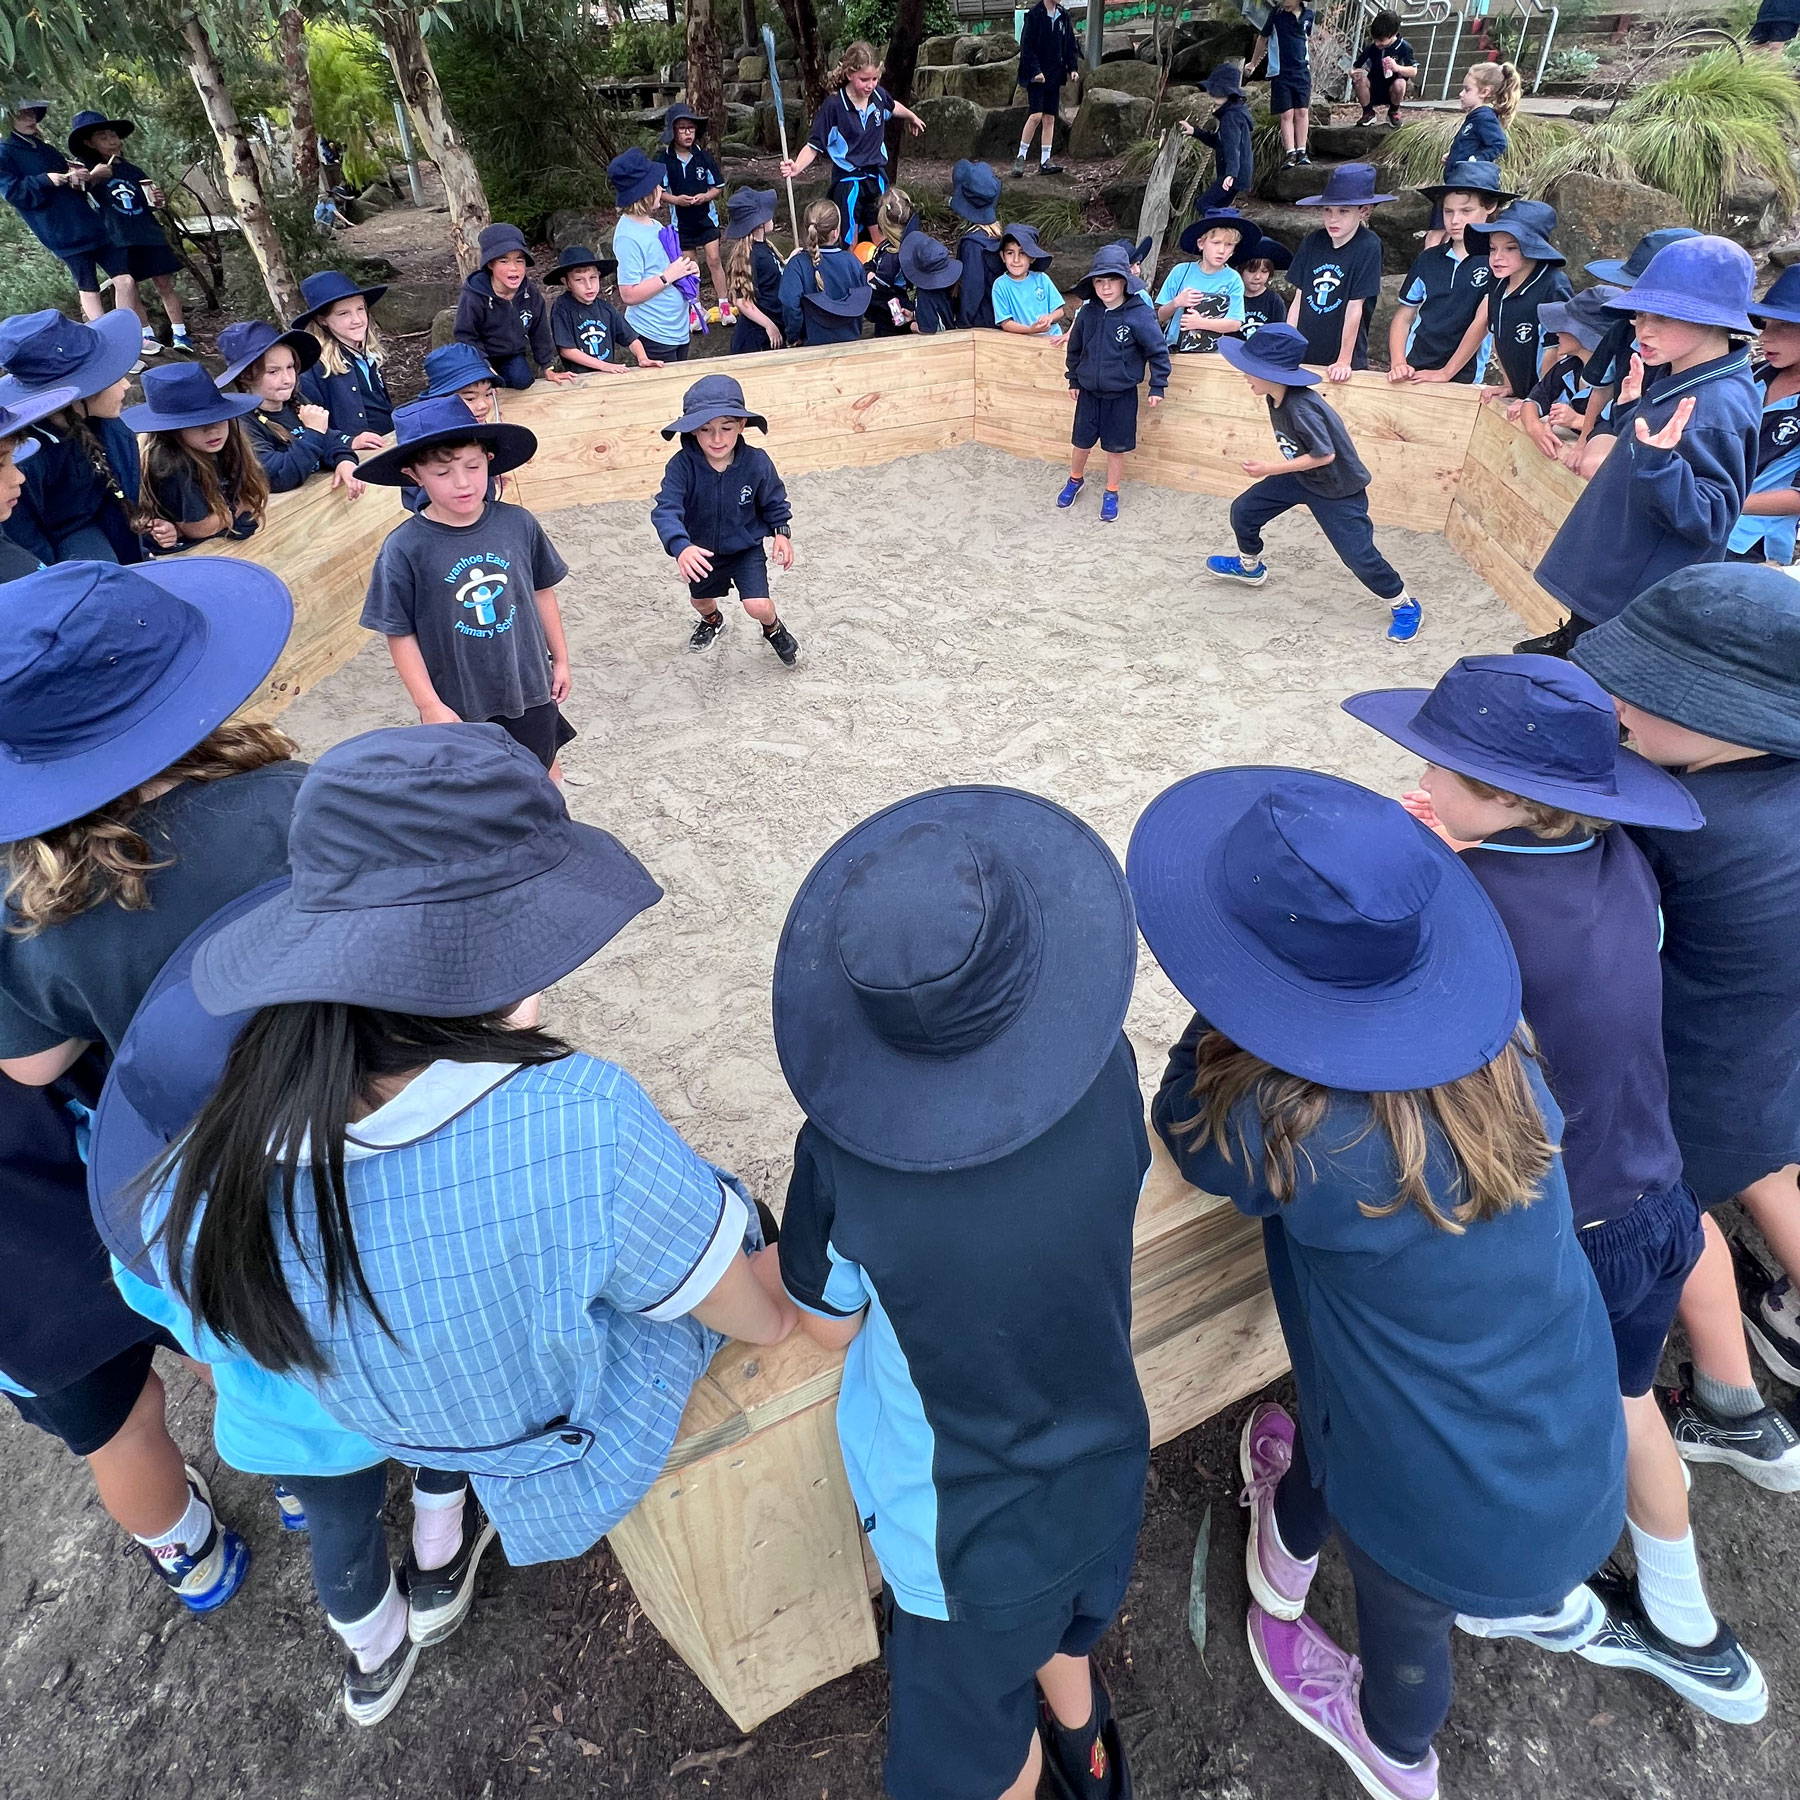 Children participating in Gaga Ball Tournament using Gaga Games' products